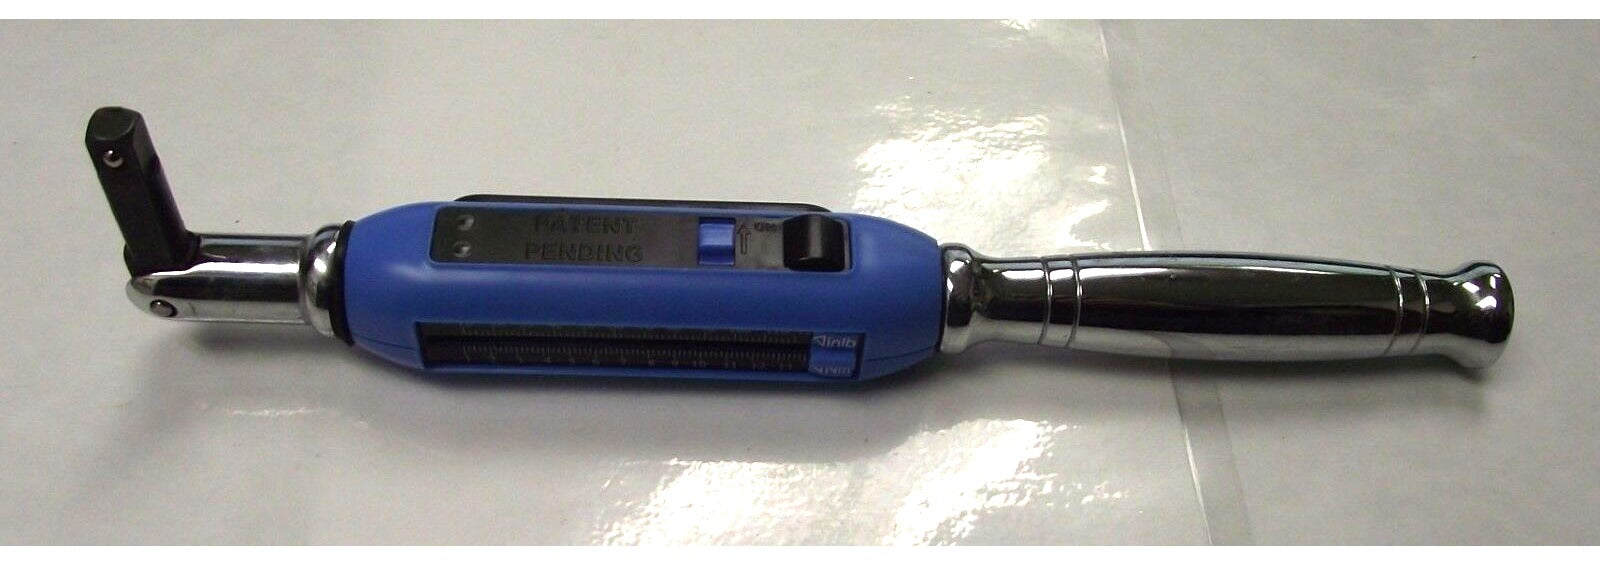 OTC 3833-25 Tire Pressure Monitoring System Electronic Torque Wrench 1/4" Drive